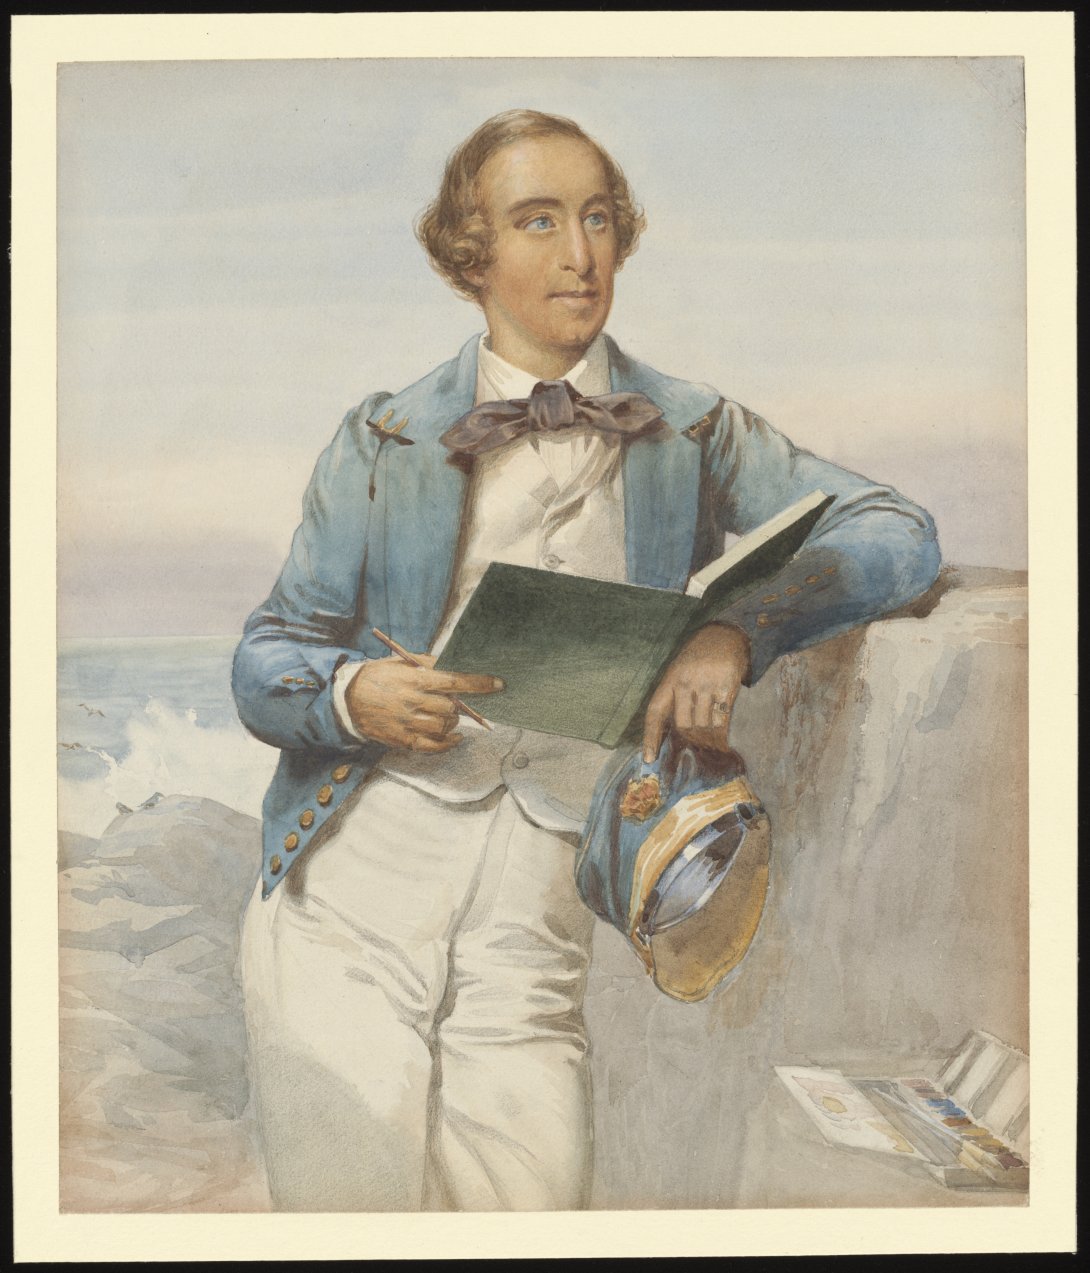 Painting of George French Angas, posed in a blue jacket and white pants, in front of a seaside backdrop.